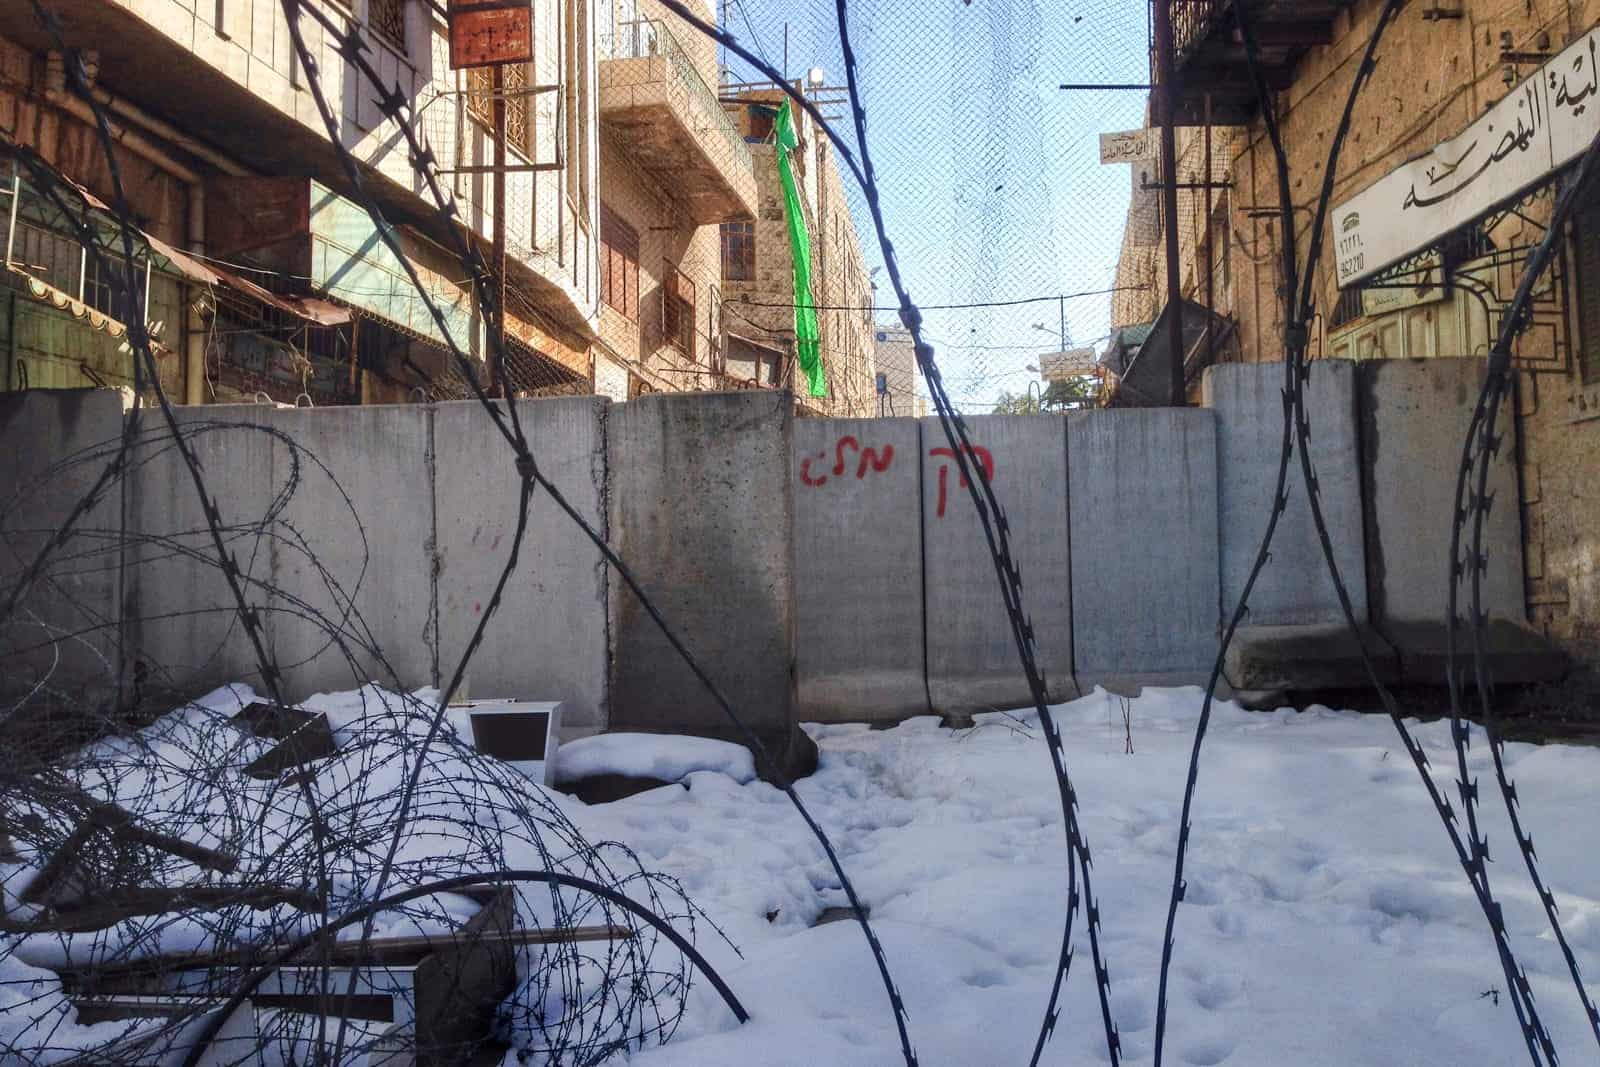 Walls and barbed Wire fences separating the Jewish and Arabs areas of Hebron in the West Bank